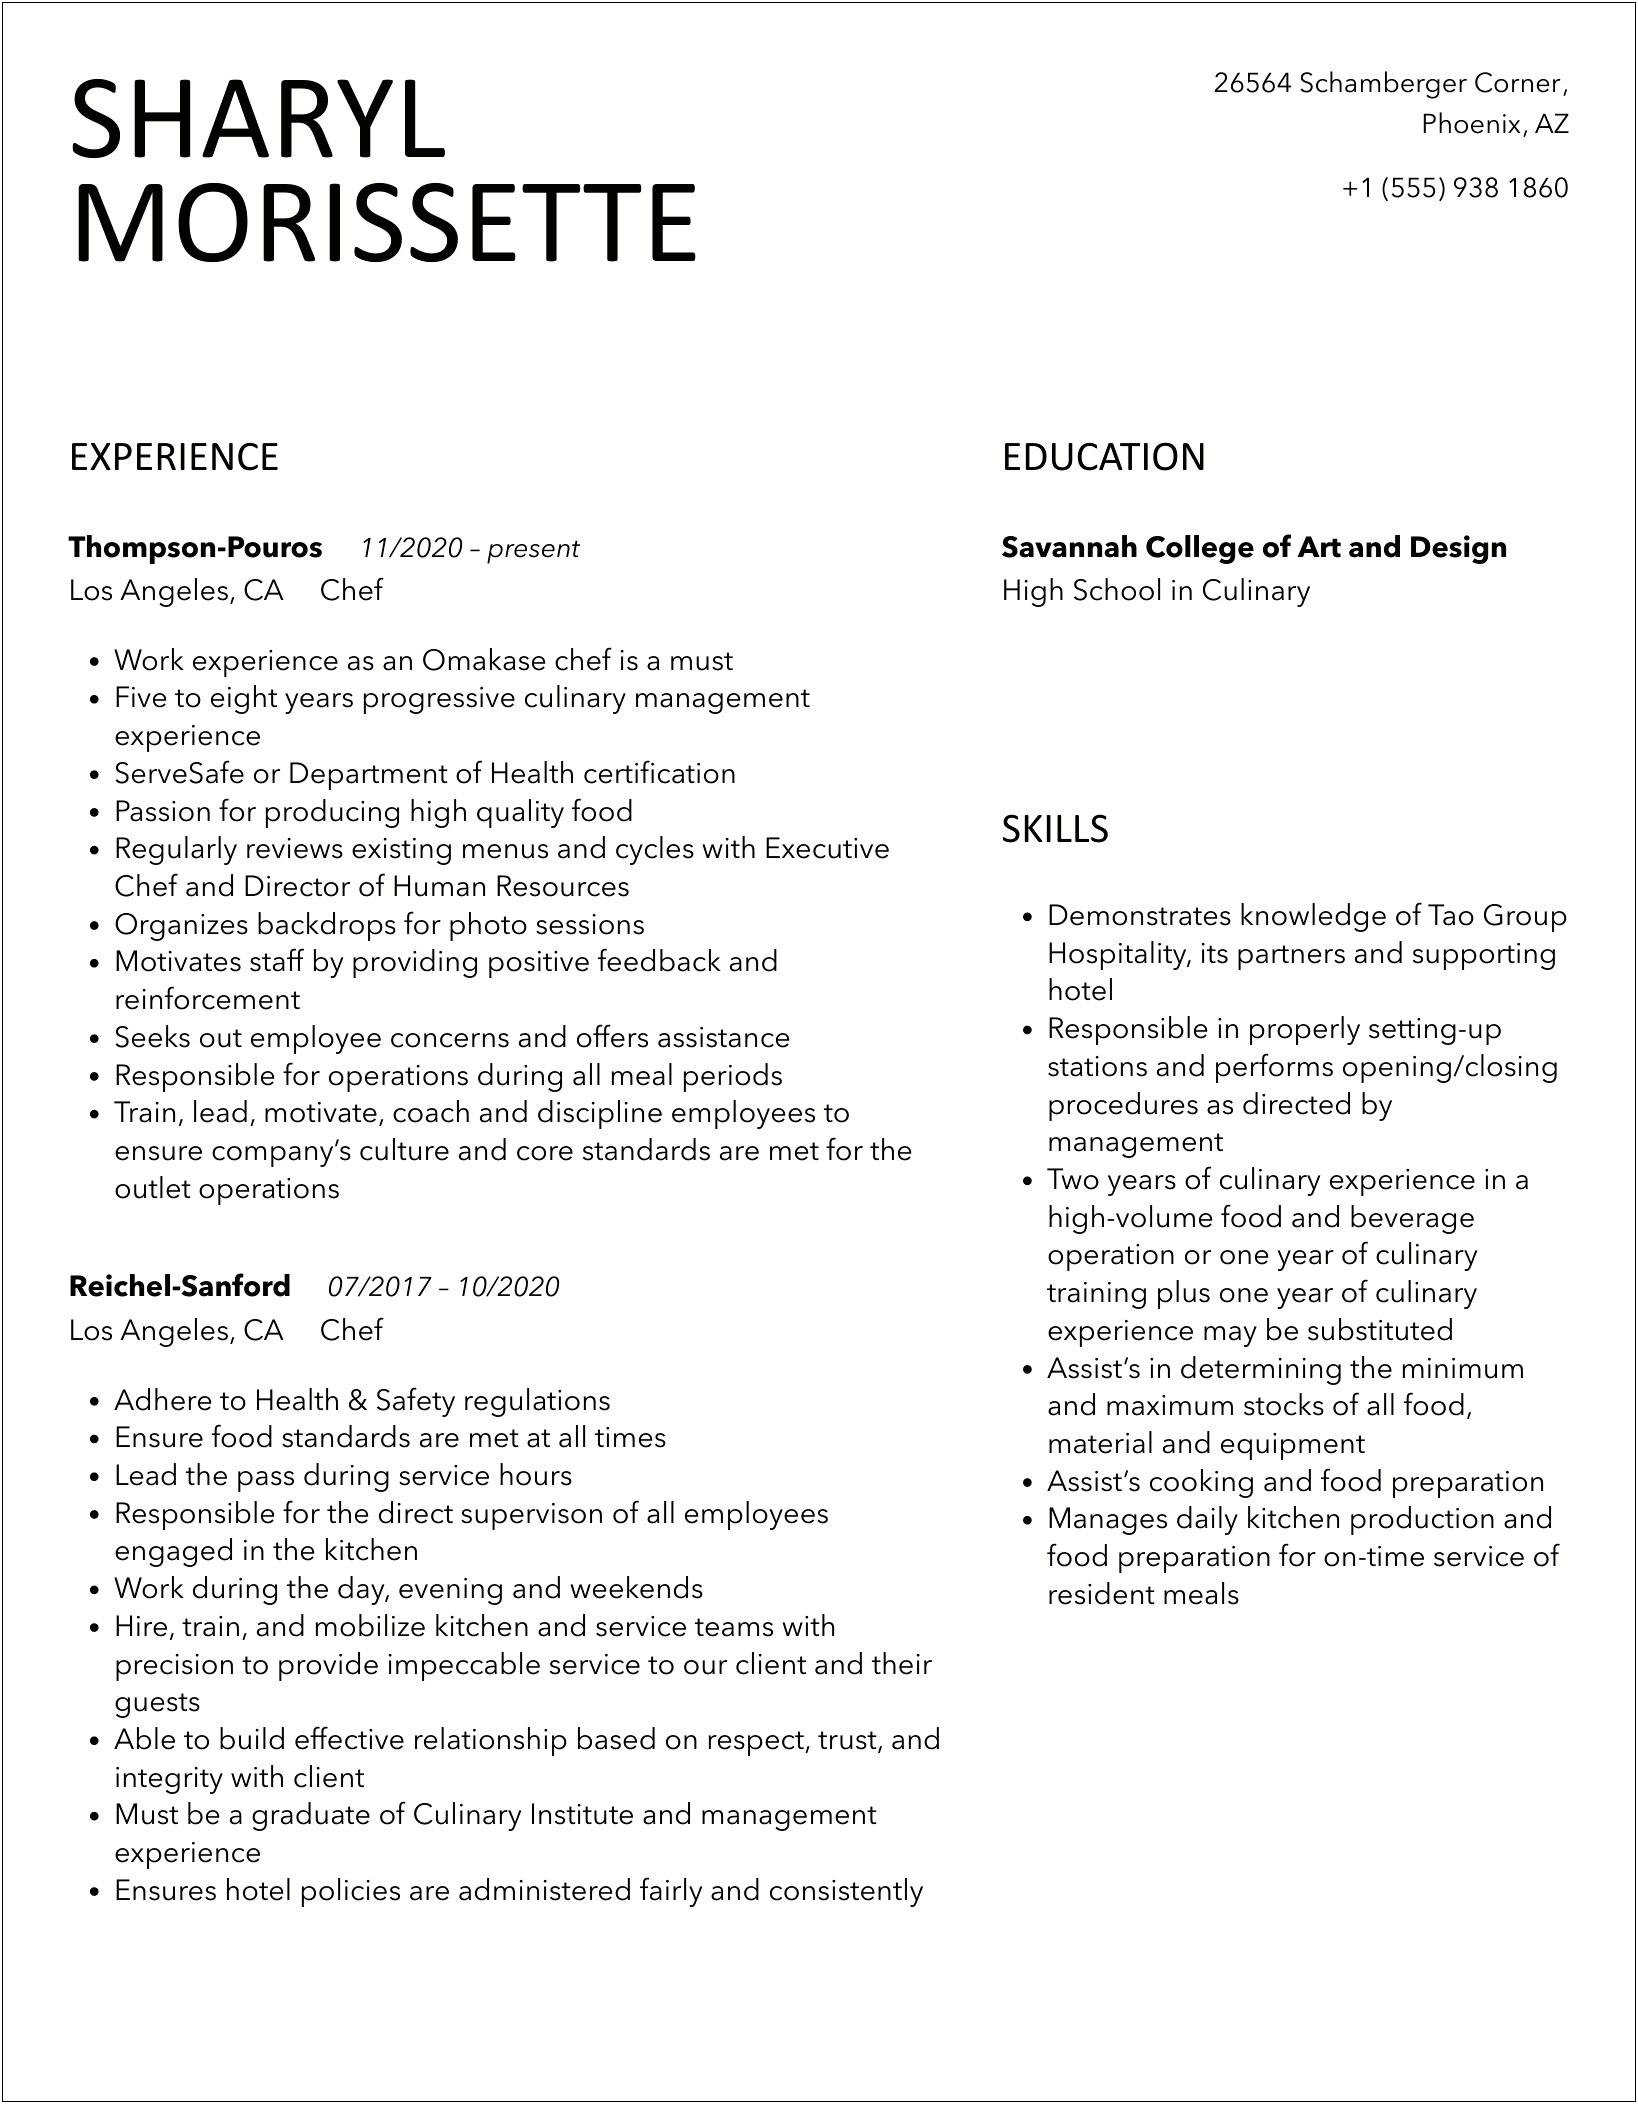 Resume For Newly Graduates With No Experience Chefs